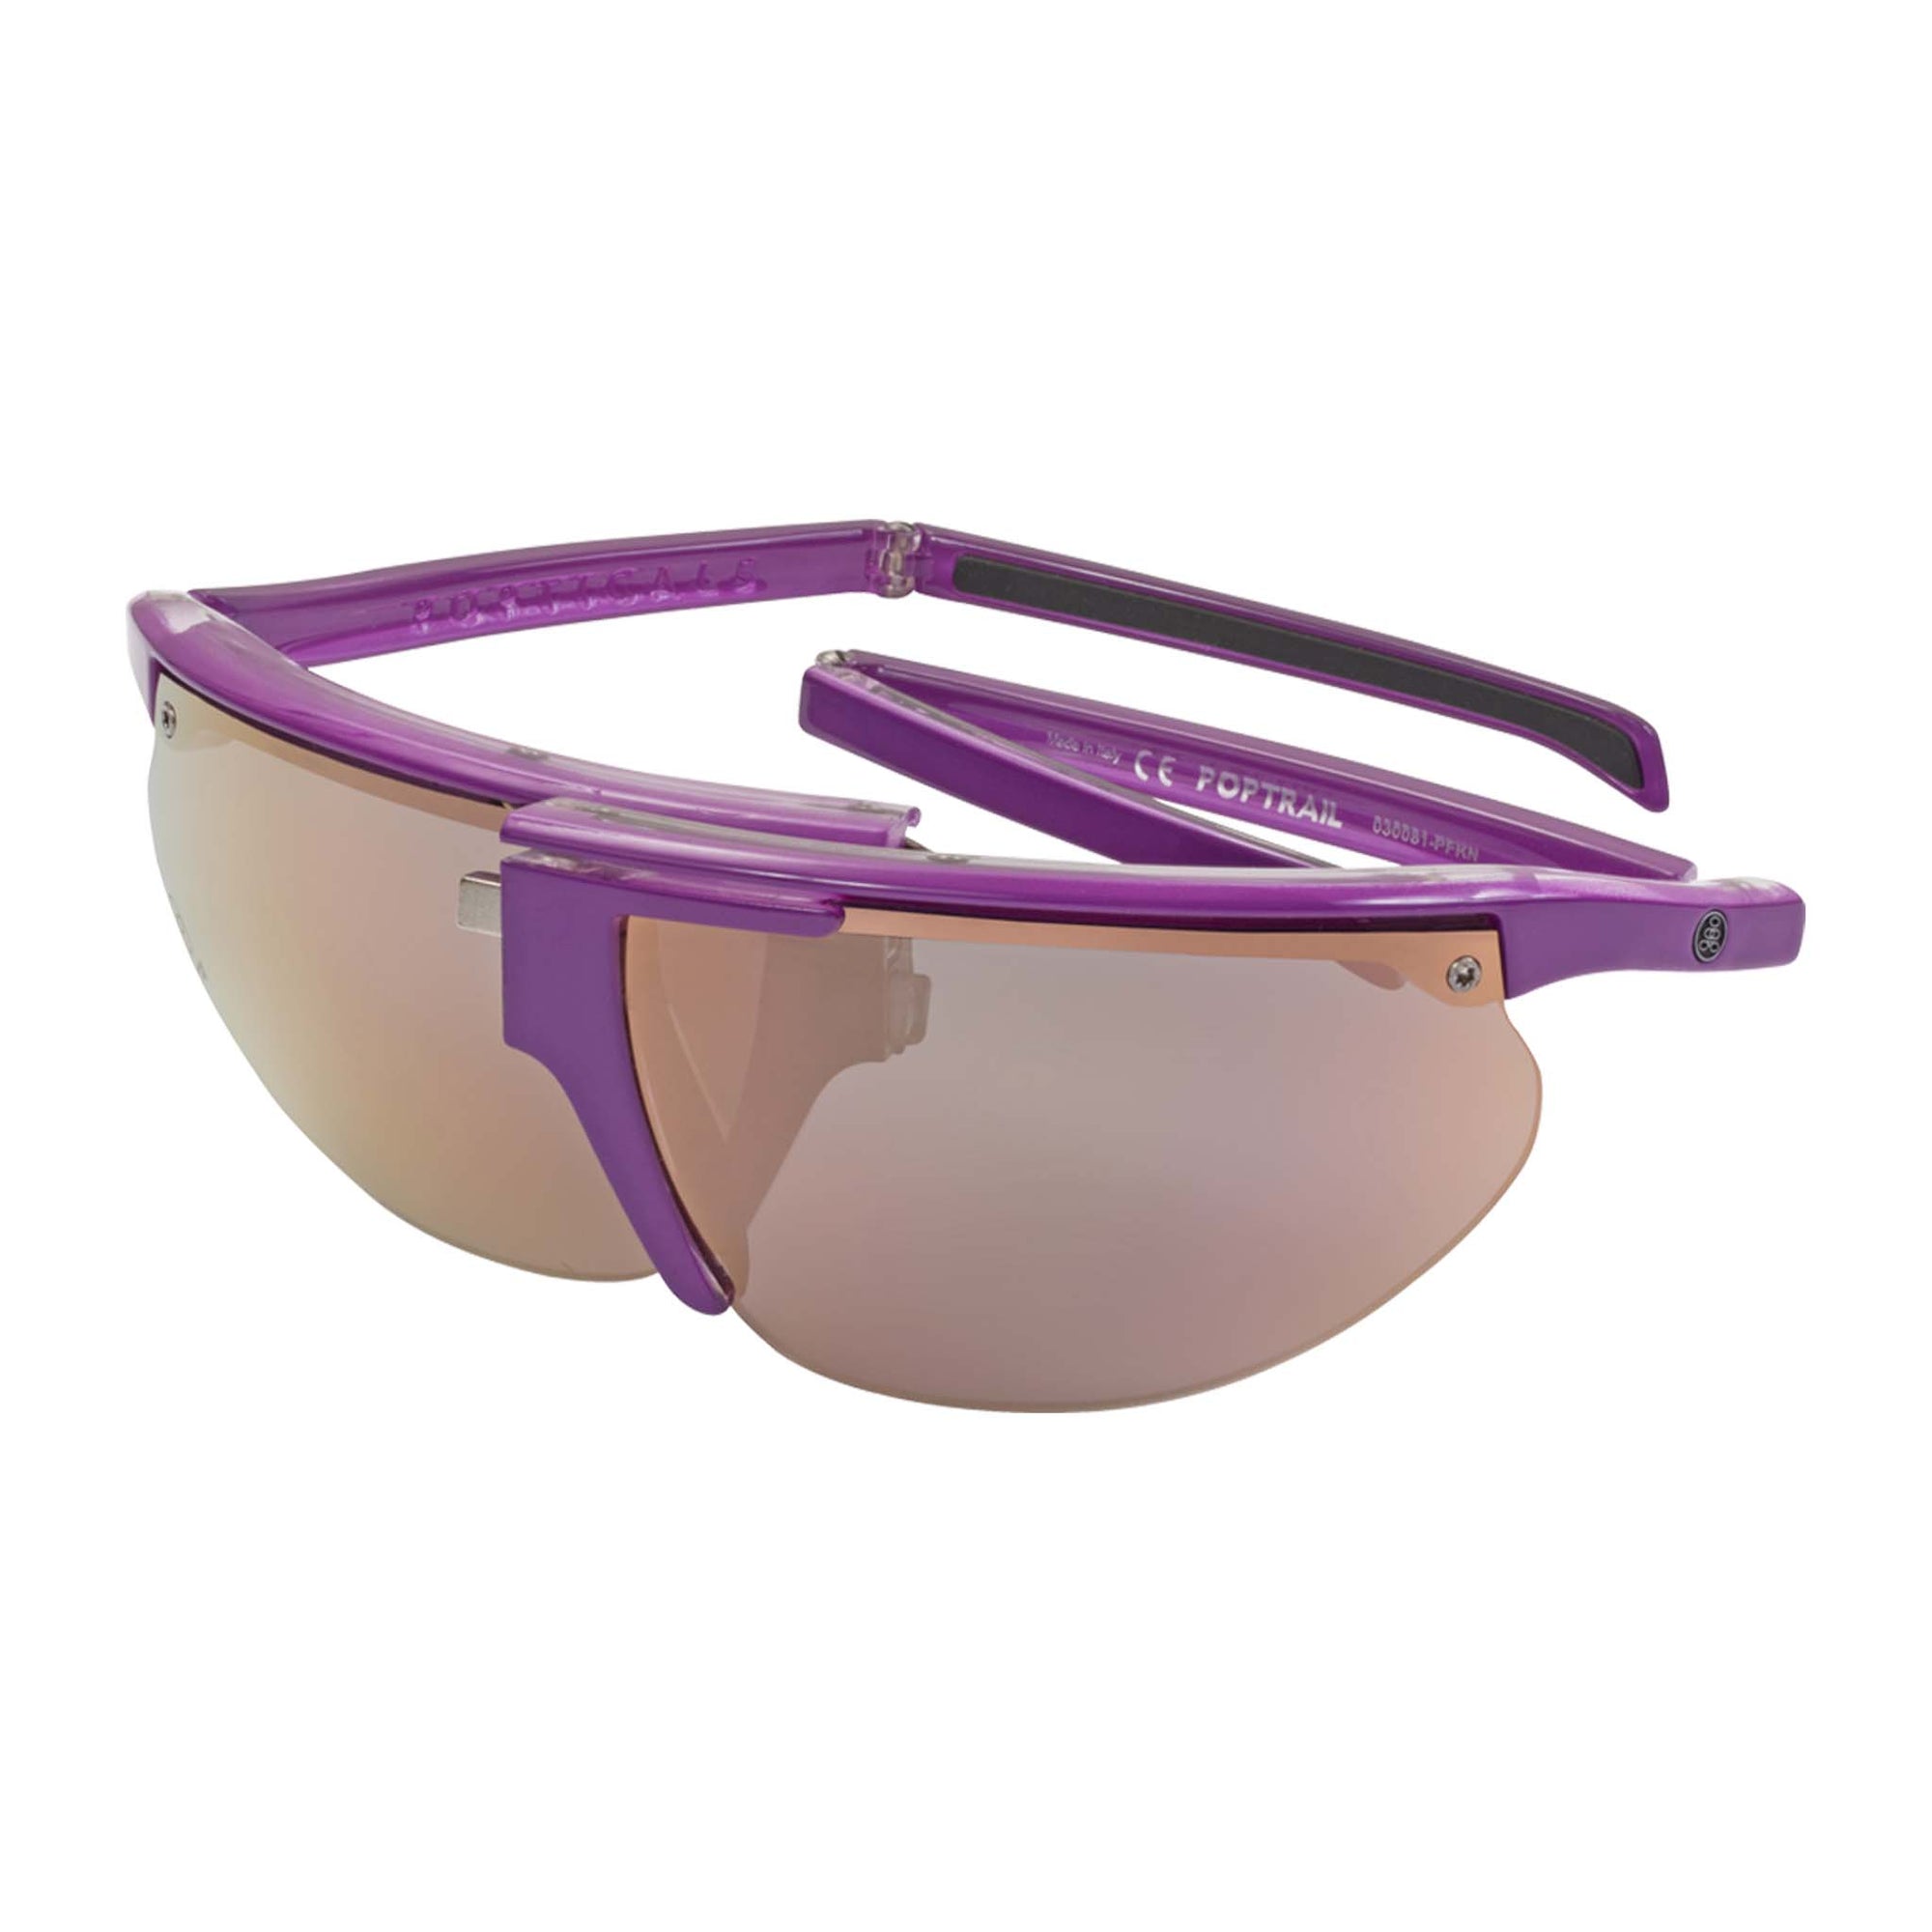 Popticals, Premium Compact Sunglasses, PopTrail, 030081-PFKN, Polarized Sunglasses, Gloss Lavender over Crystal Frame, Gray Lenses w/Pink Mirror Finish, Glam View